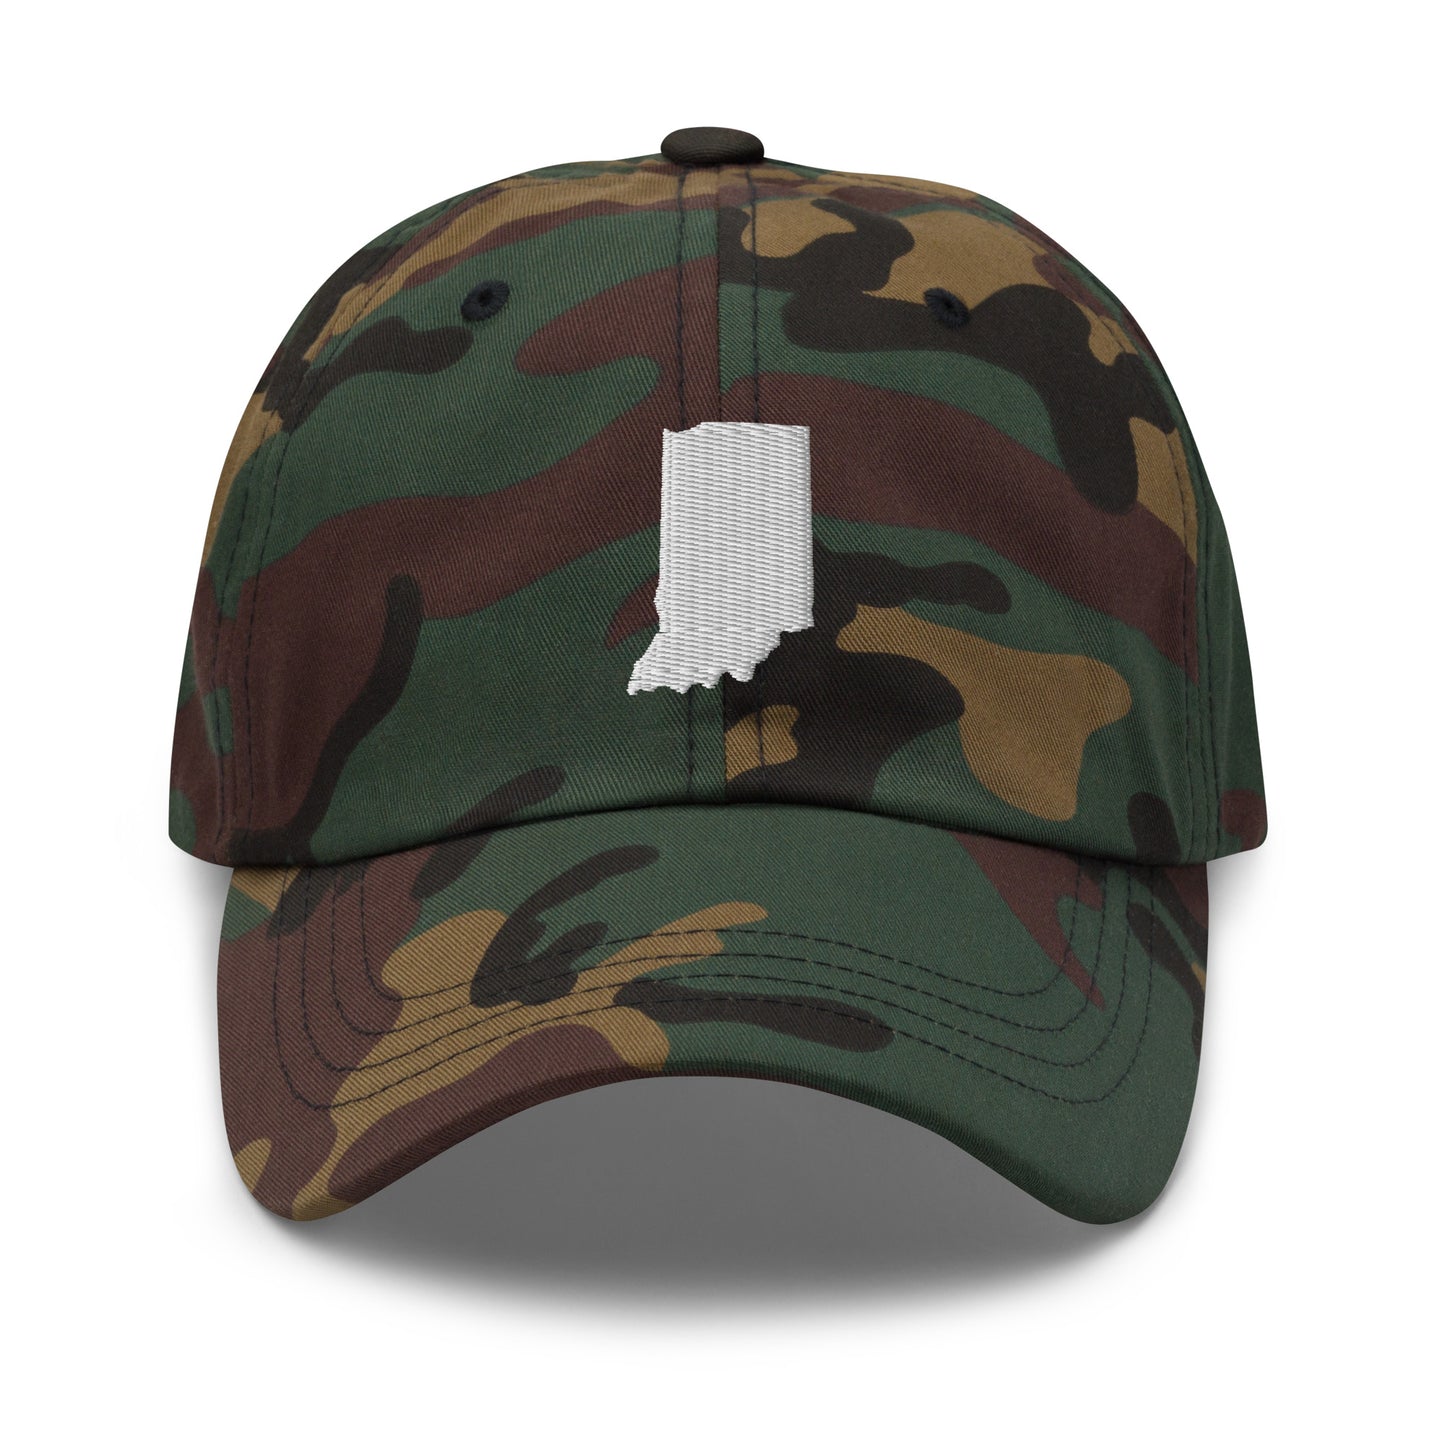 Indiana State Silhouette Dad Hat